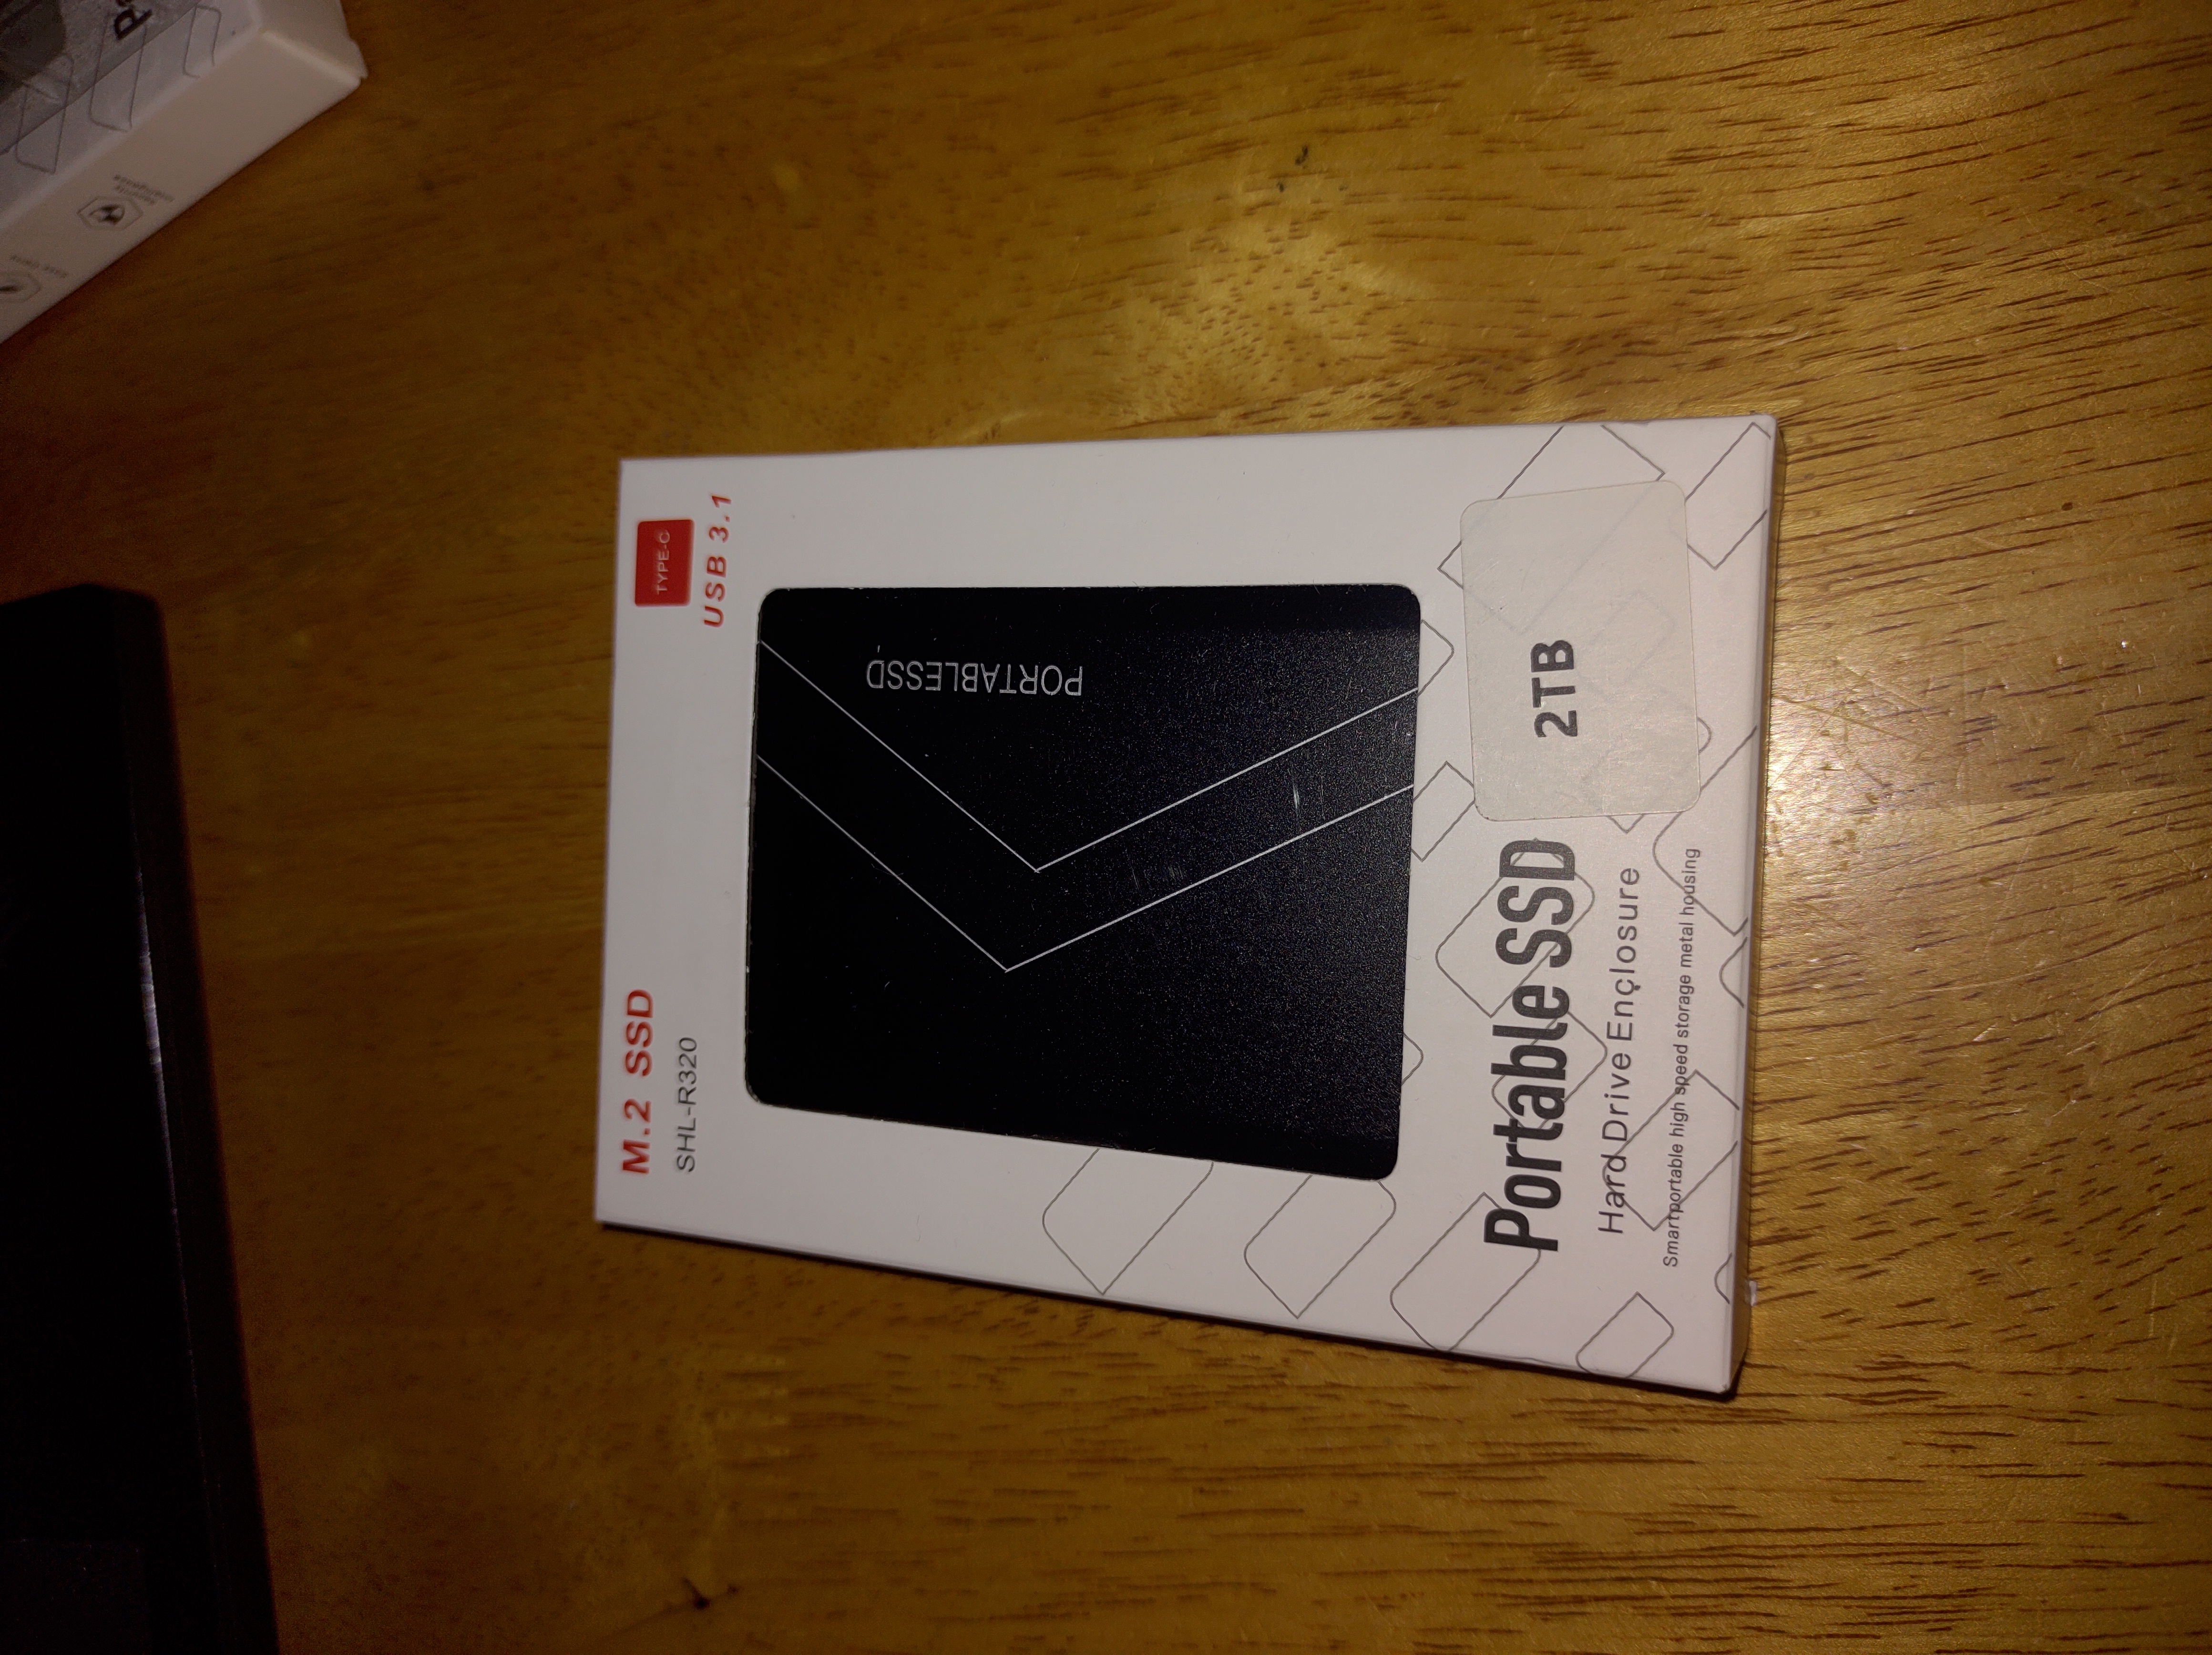 One of Two "2TB"external m.2 USB-C SSD's purchased